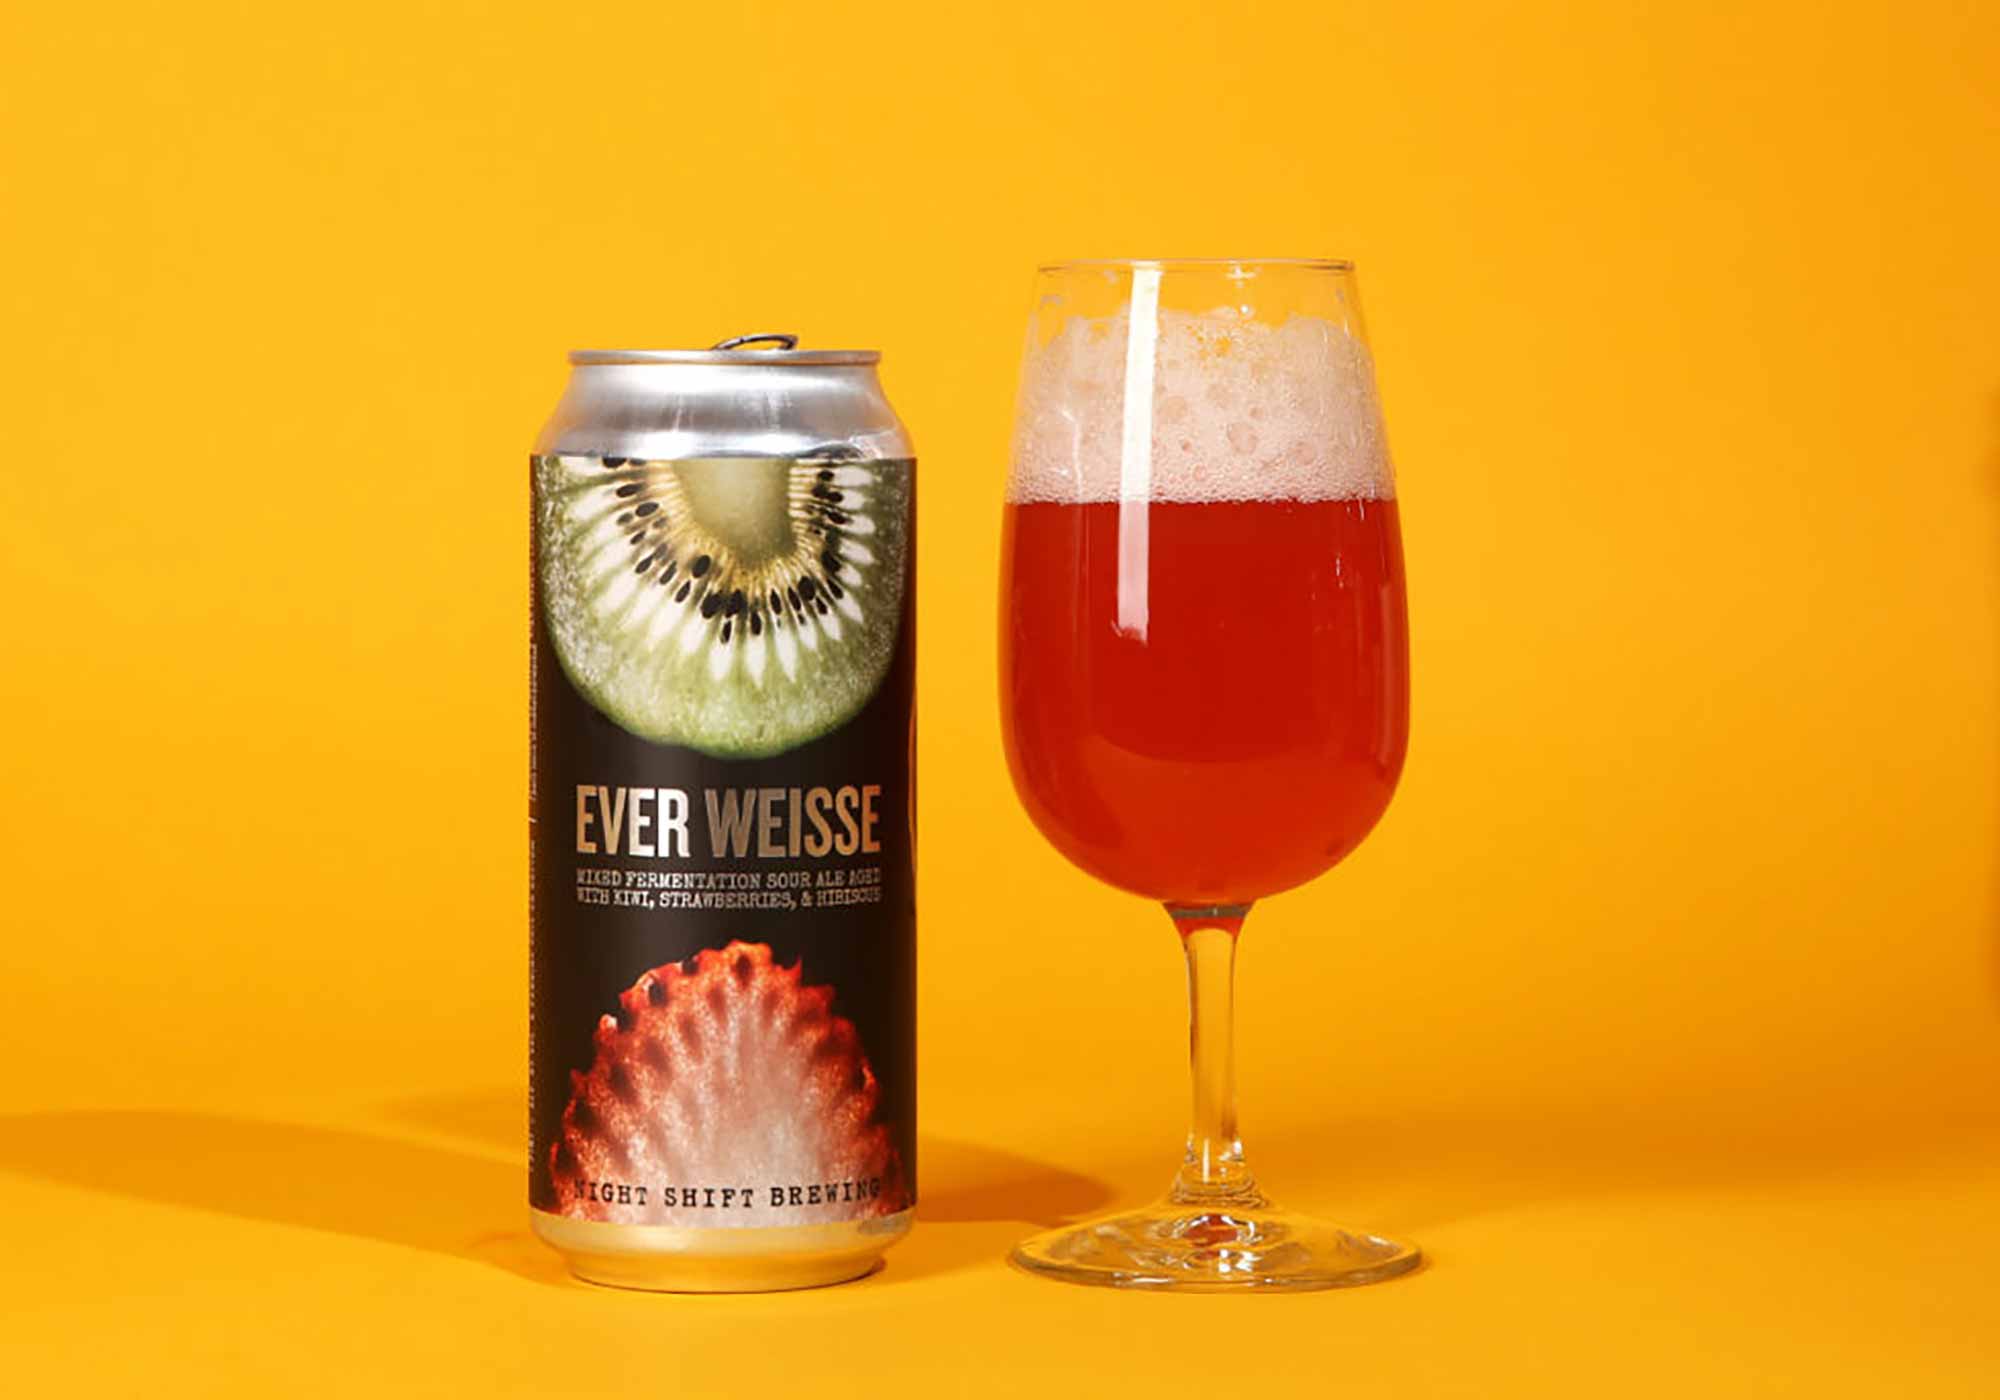 What Exactly Is a Berliner Weisse?